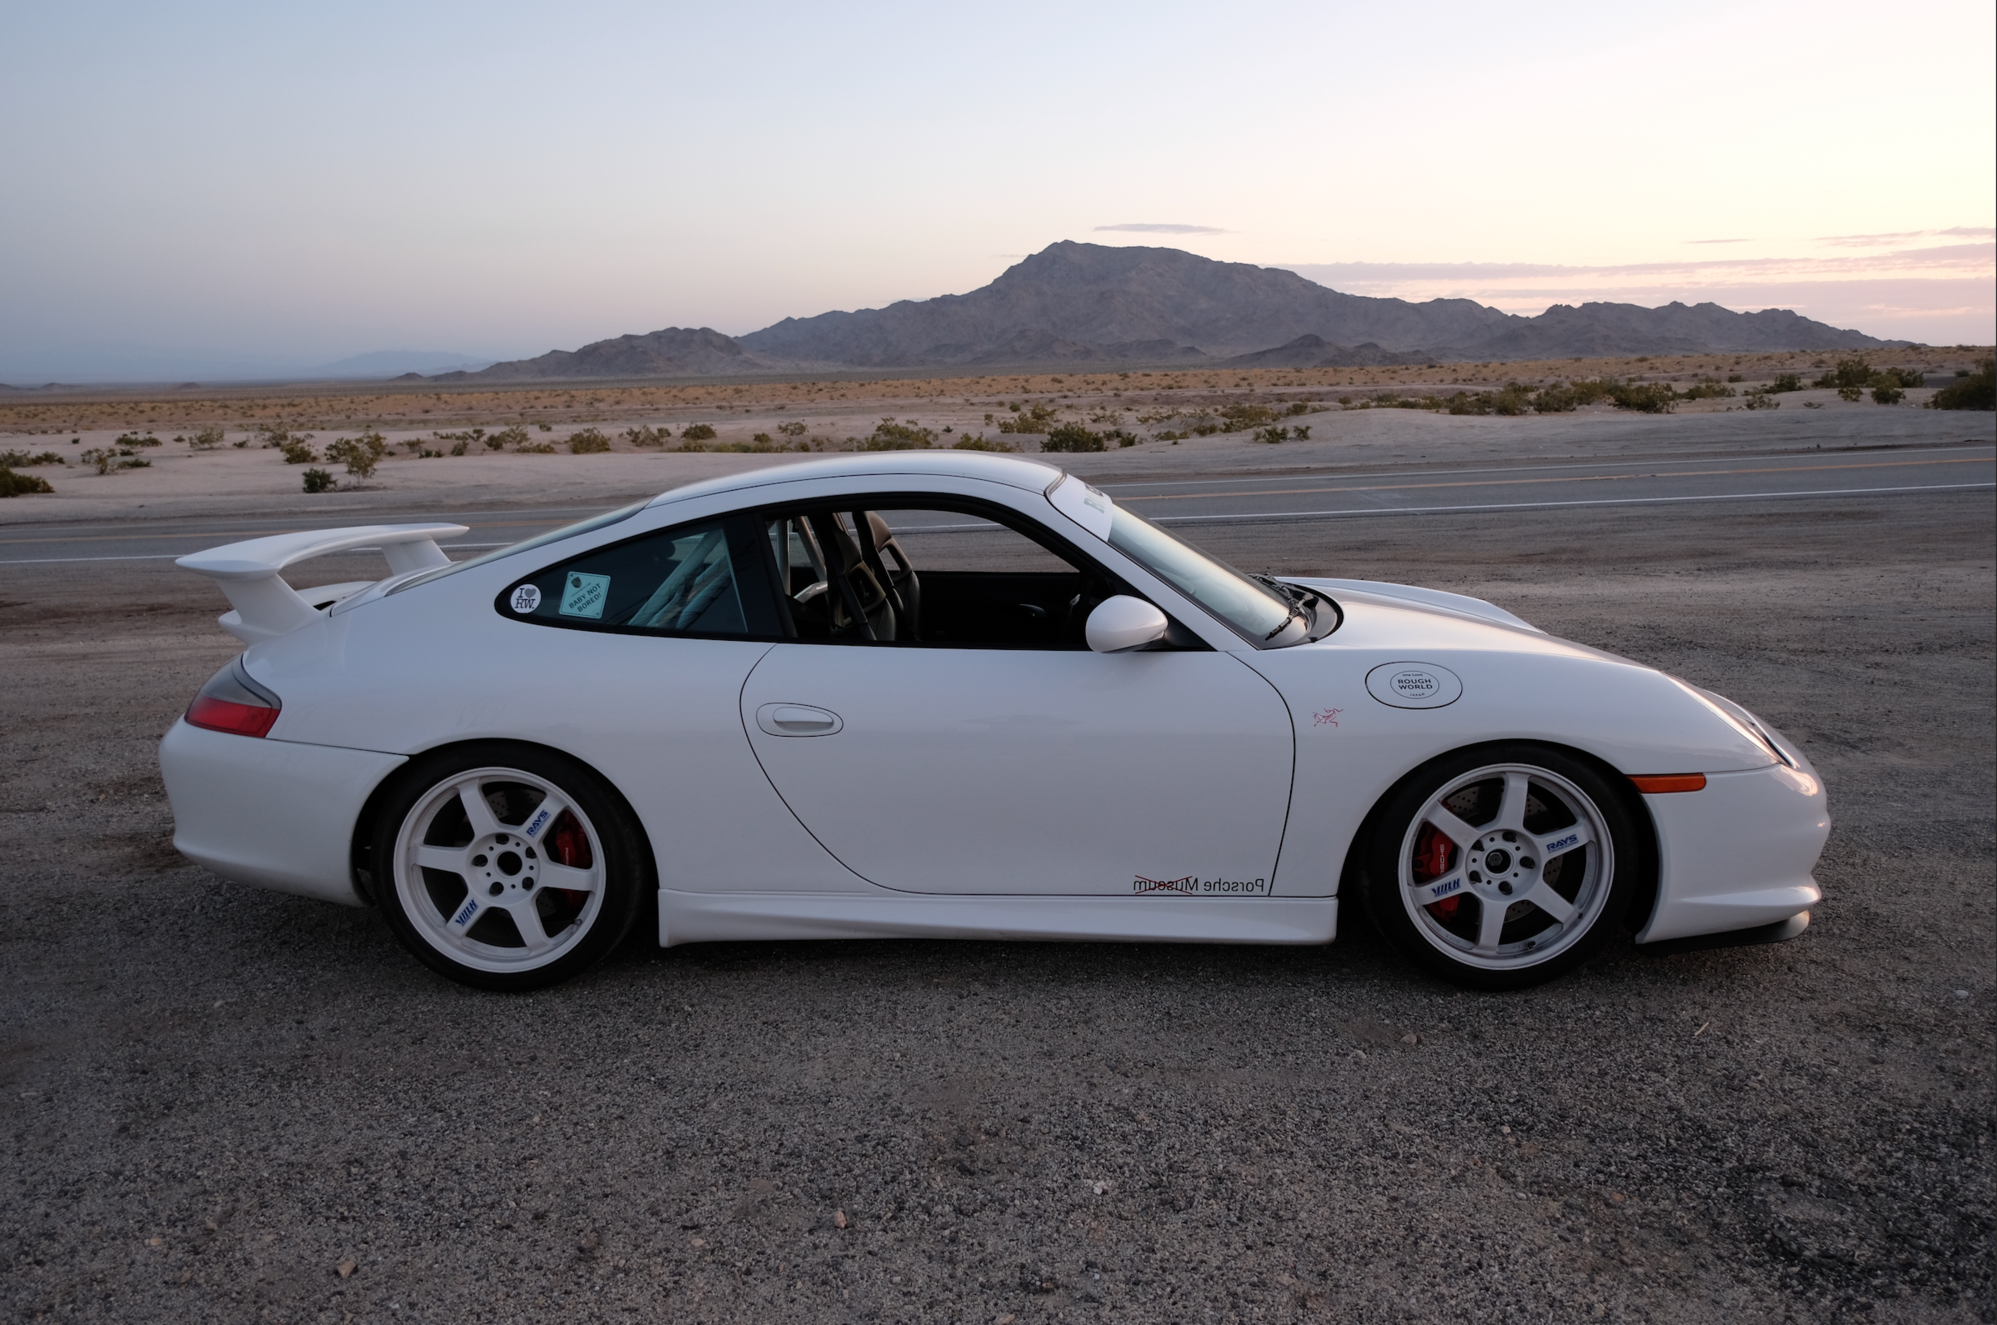 2004 Porsche GT3 - 2004 996 GT3 Driver - Used - VIN WP0AC29944S692931 - 116,888 Miles - Manual - White - Anaheim, CA 92805, United States